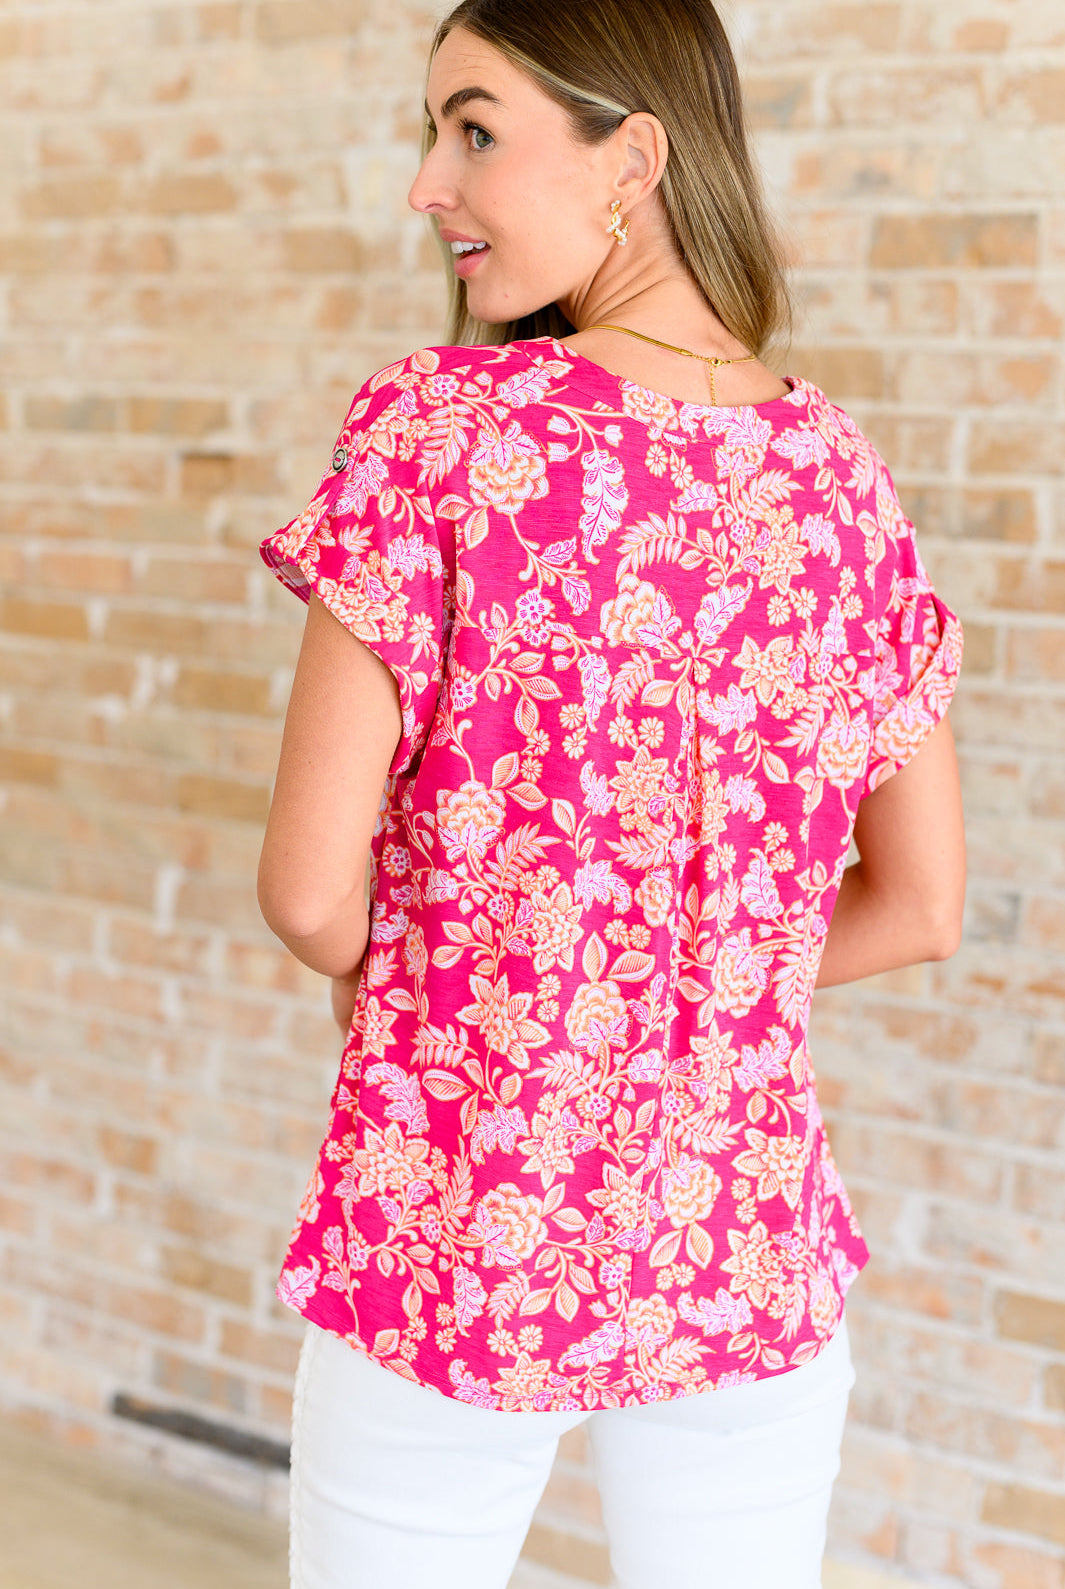 Lizzy Cap Sleeve Top in Pink and Peach Floral-Short Sleeve Tops-Krush Kandy, Women's Online Fashion Boutique Located in Phoenix, Arizona (Scottsdale Area)